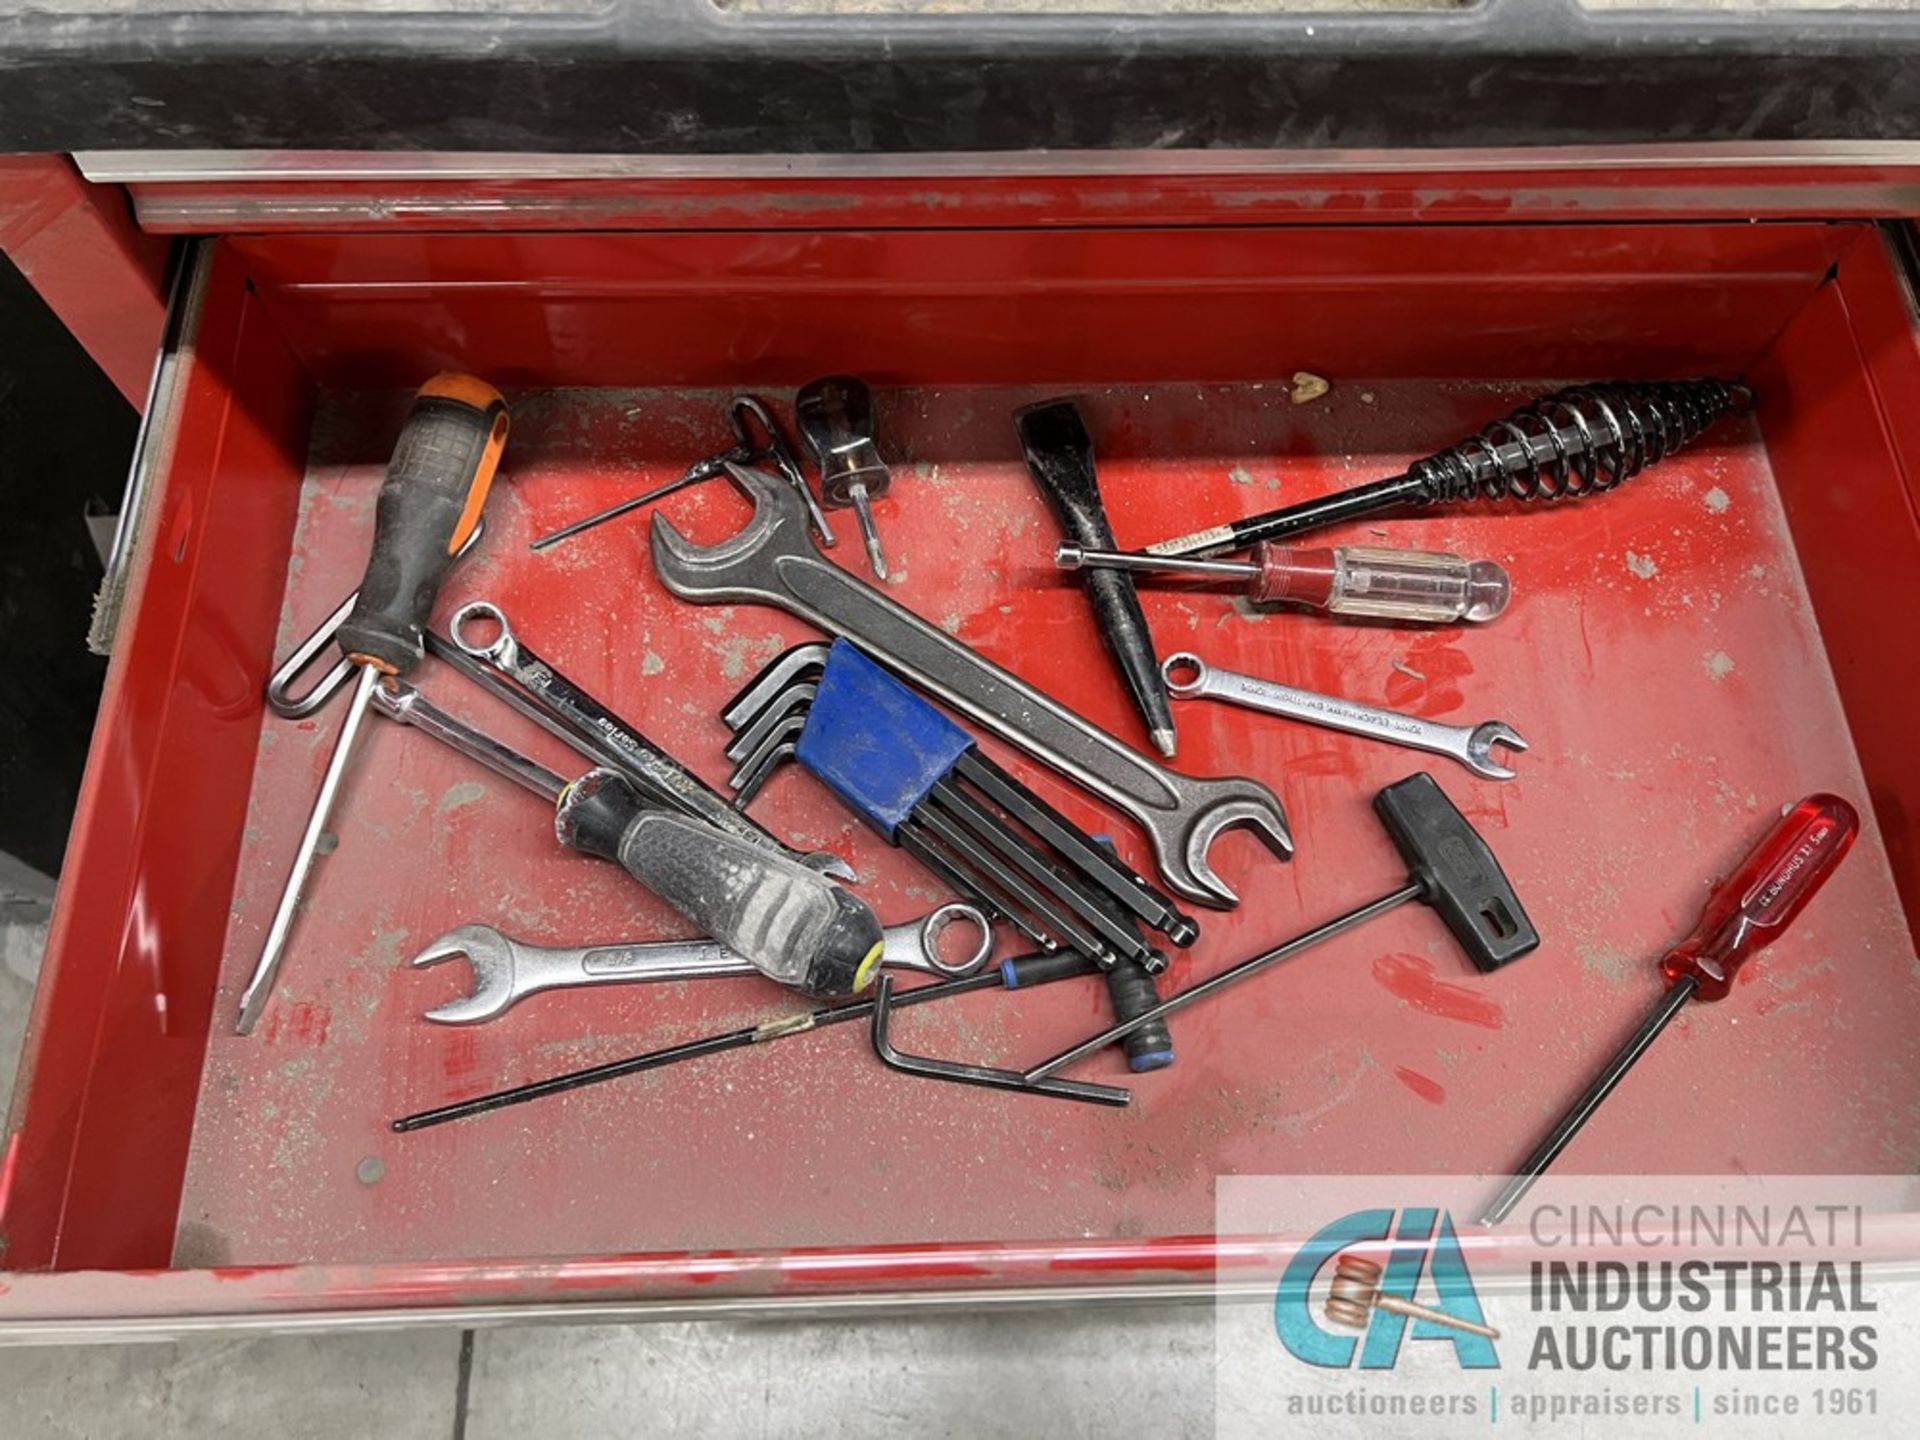 PORTABLE TOOLBOXES WITH MISCELLANEOUS TOOLS - Image 3 of 7